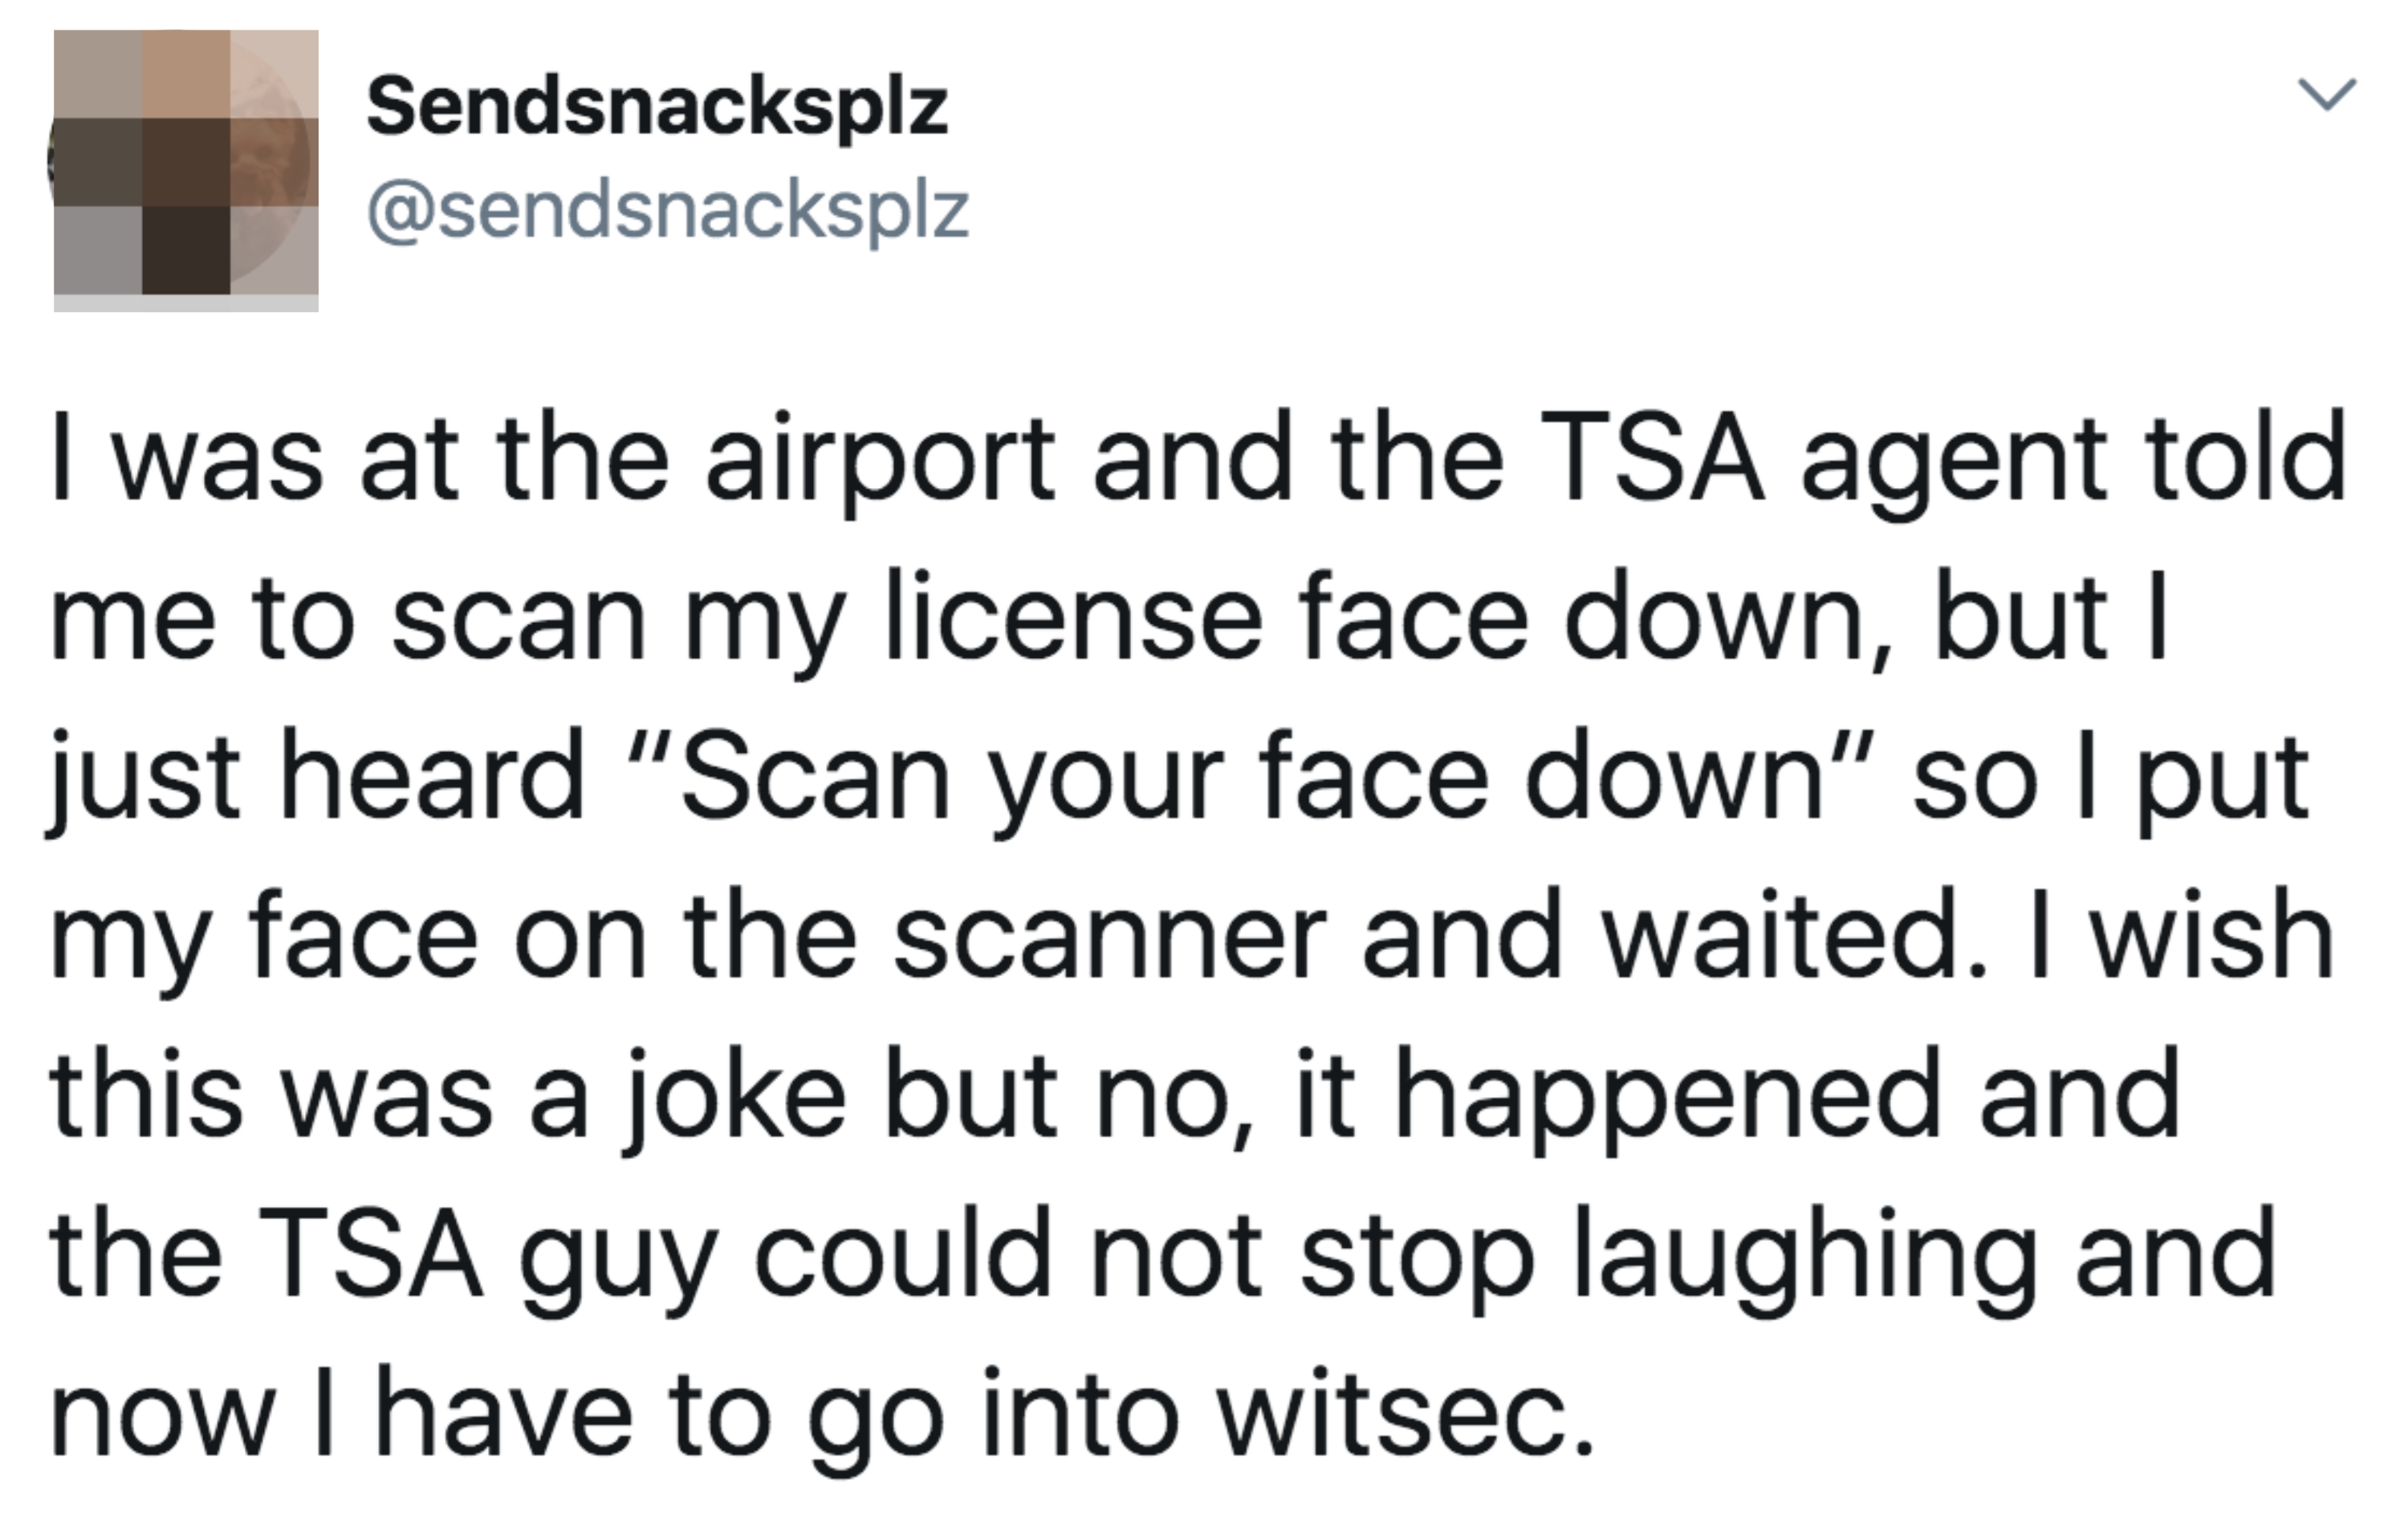 Tweet: &quot;I was at the airport and the TSA agent said &#x27;scan your license face down,&#x27; so i put my face on the scanner and waited&quot;